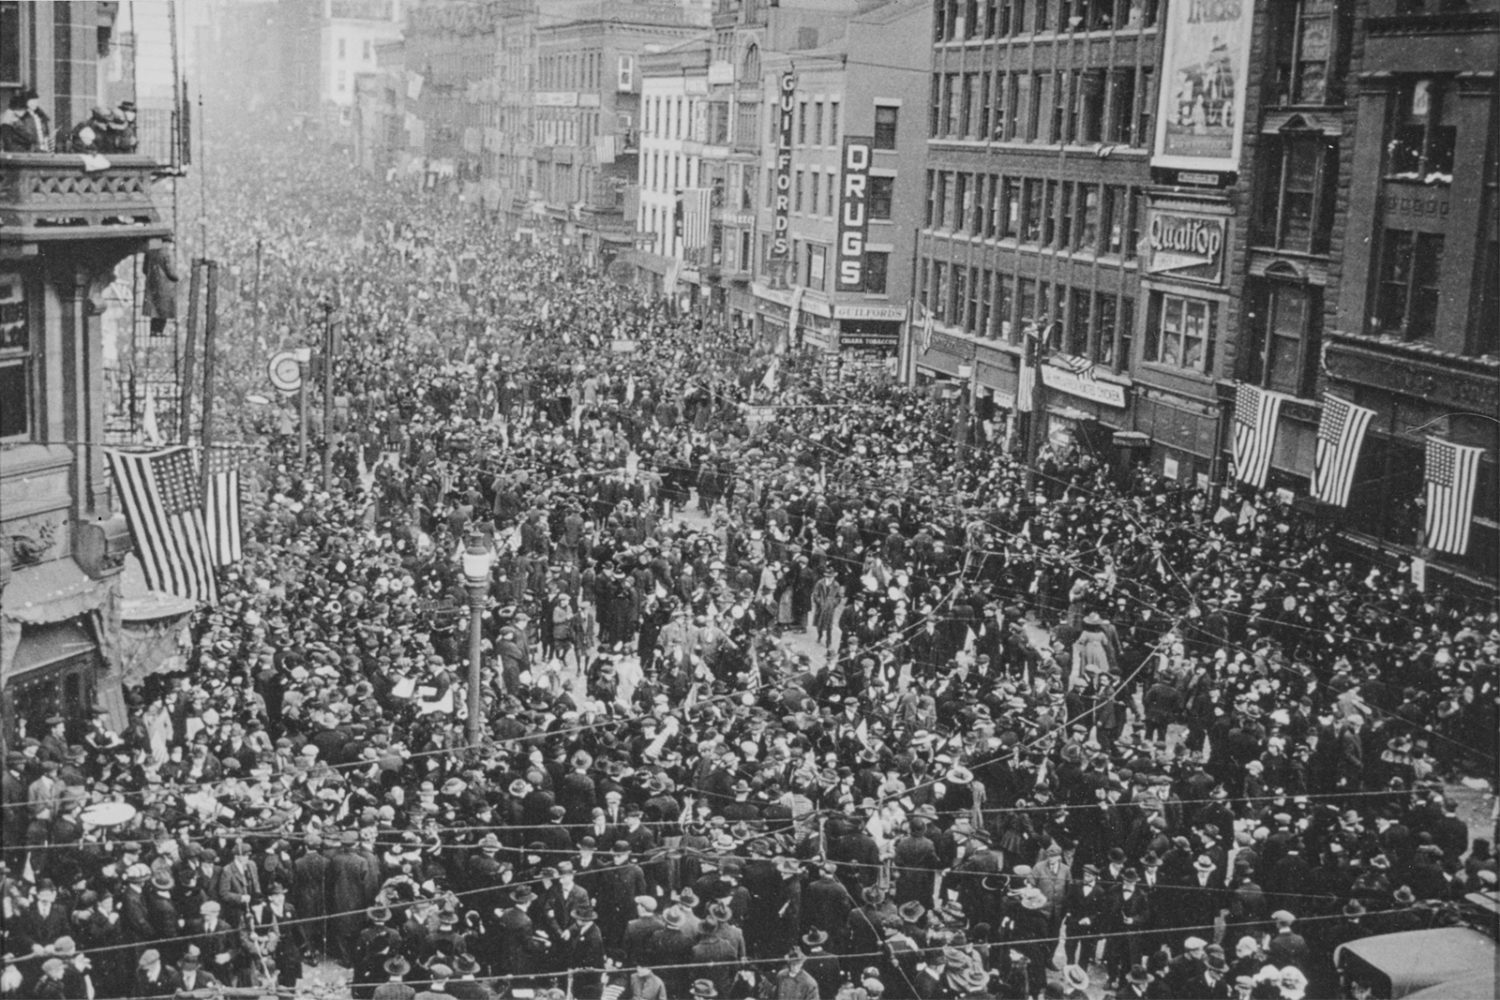 Rochester residents celebrate the end of World War I on Armistice Day, Nov. 11, 1918. – photo from City of Rochester